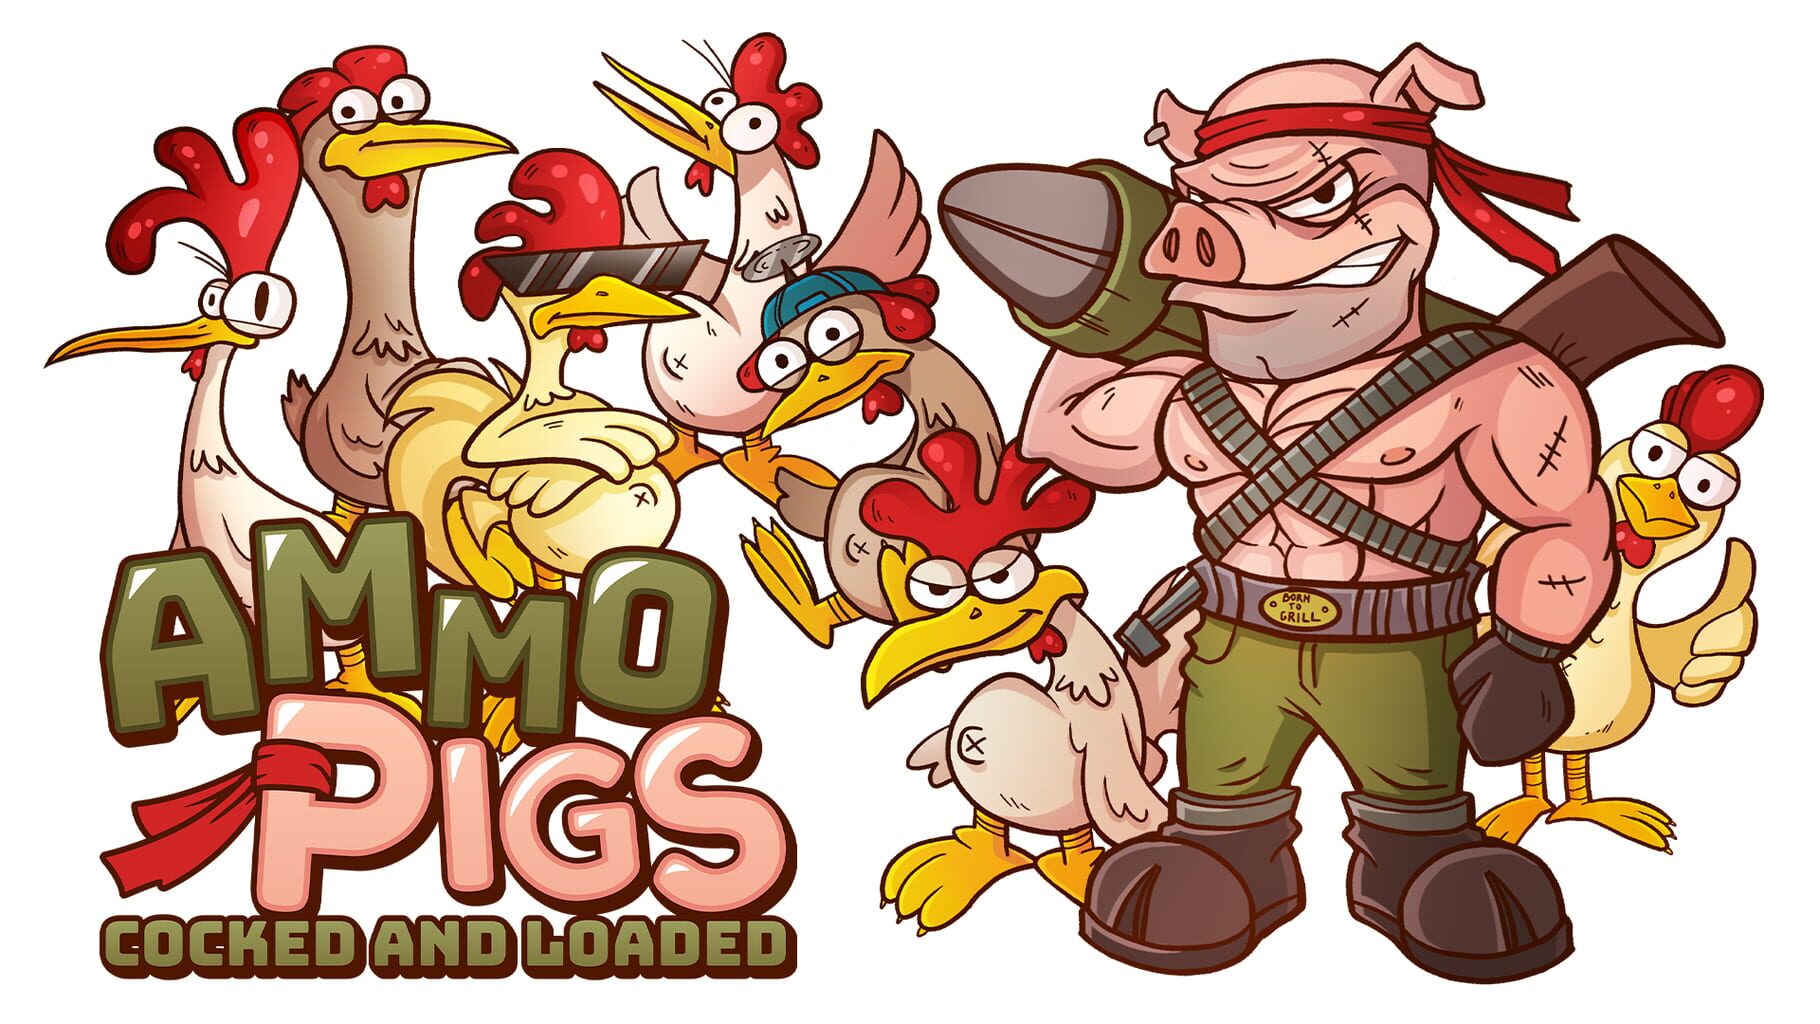 Ammo Pigs: Cocked and Loaded artwork